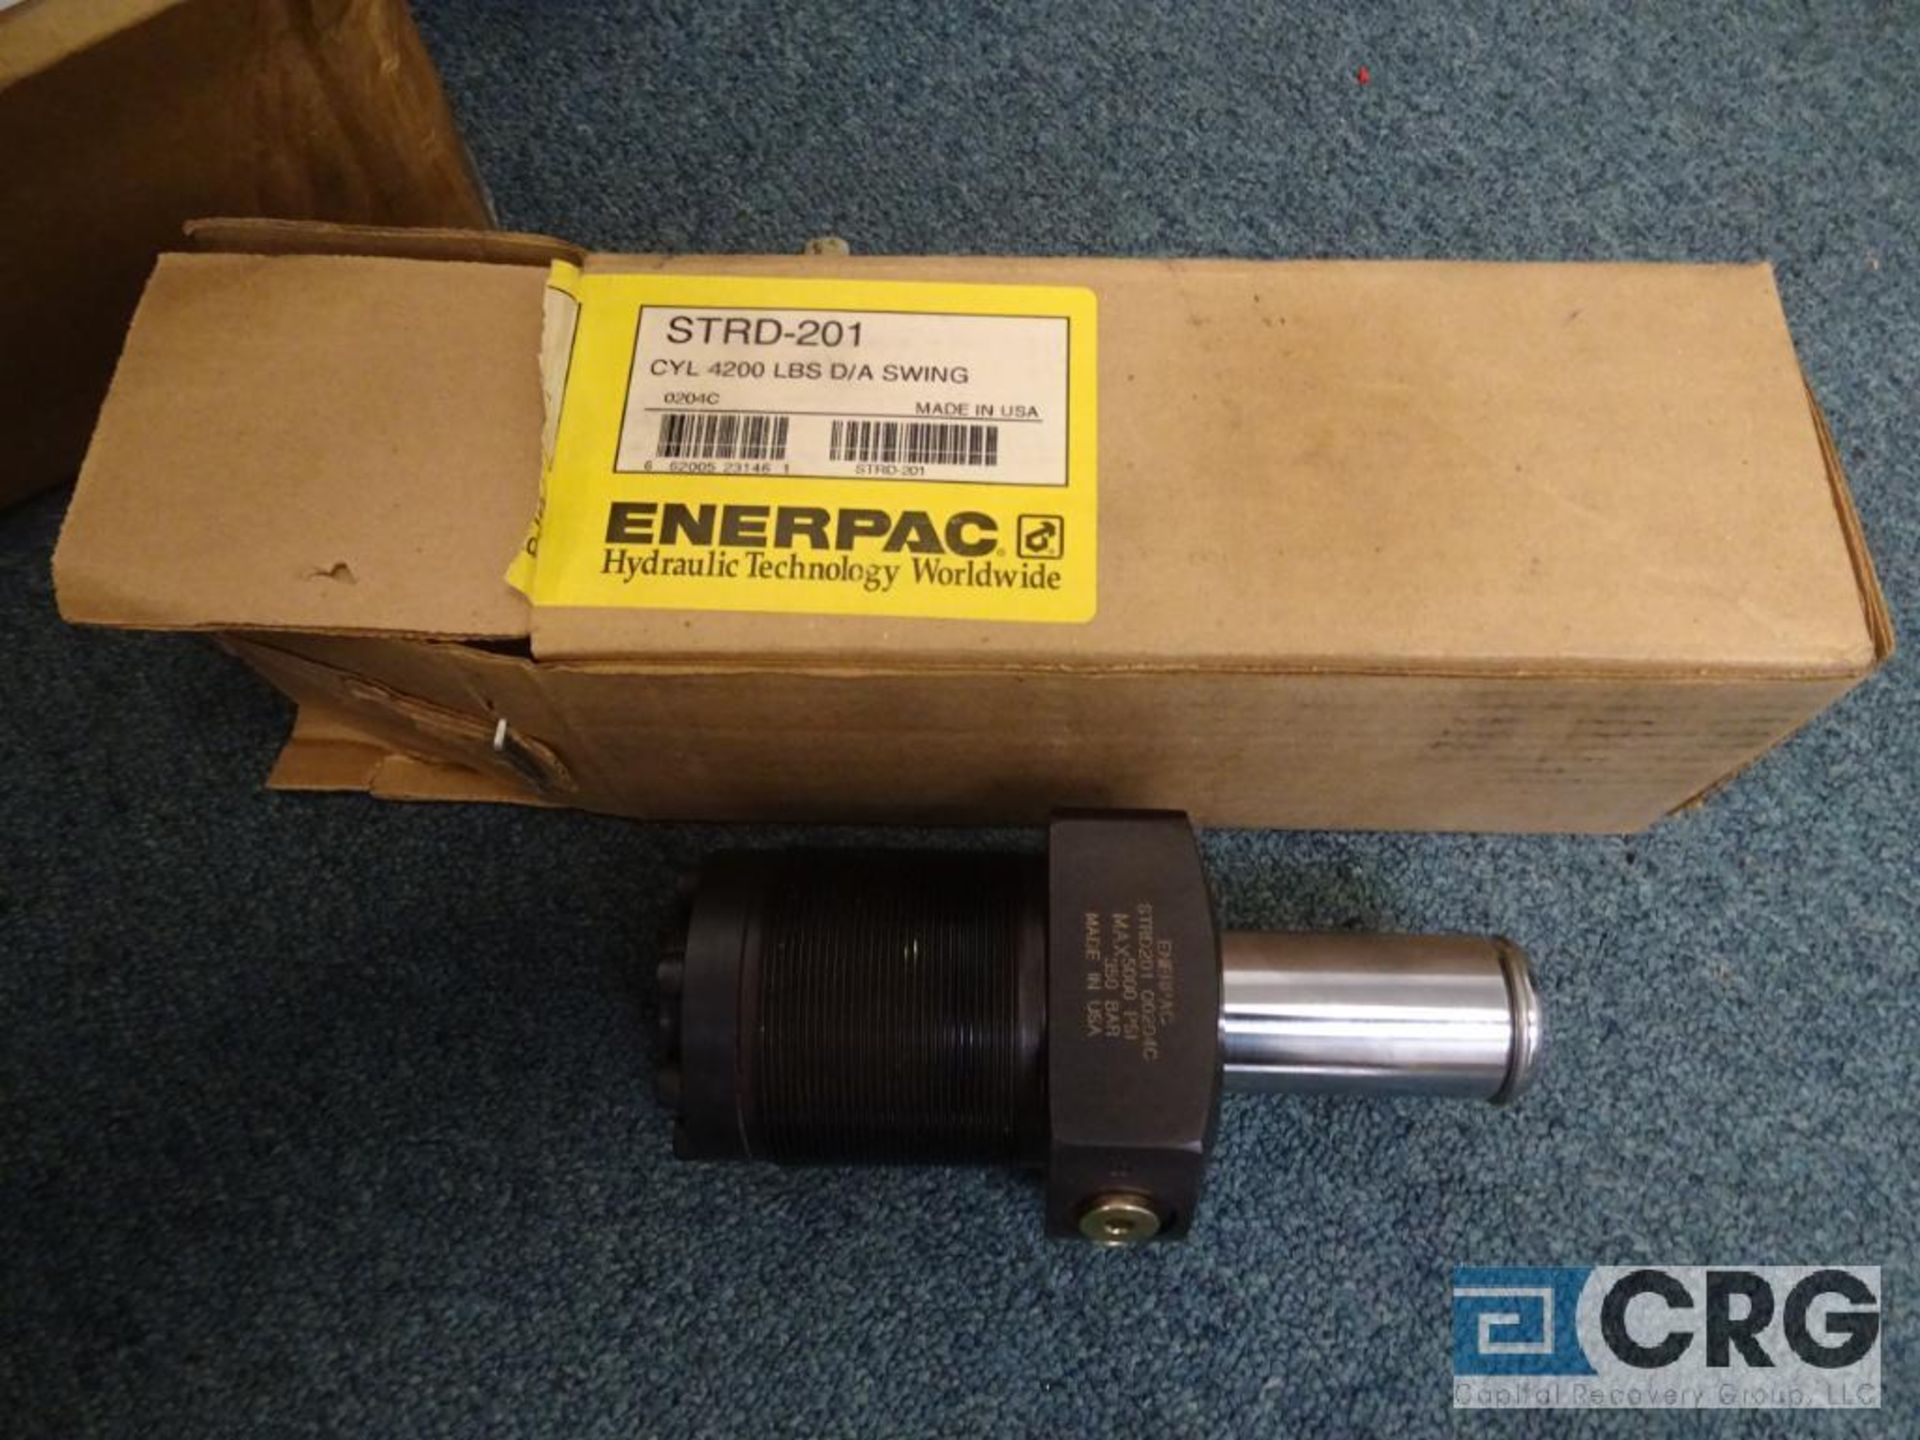 Enerpac Parts - Image 5 of 5